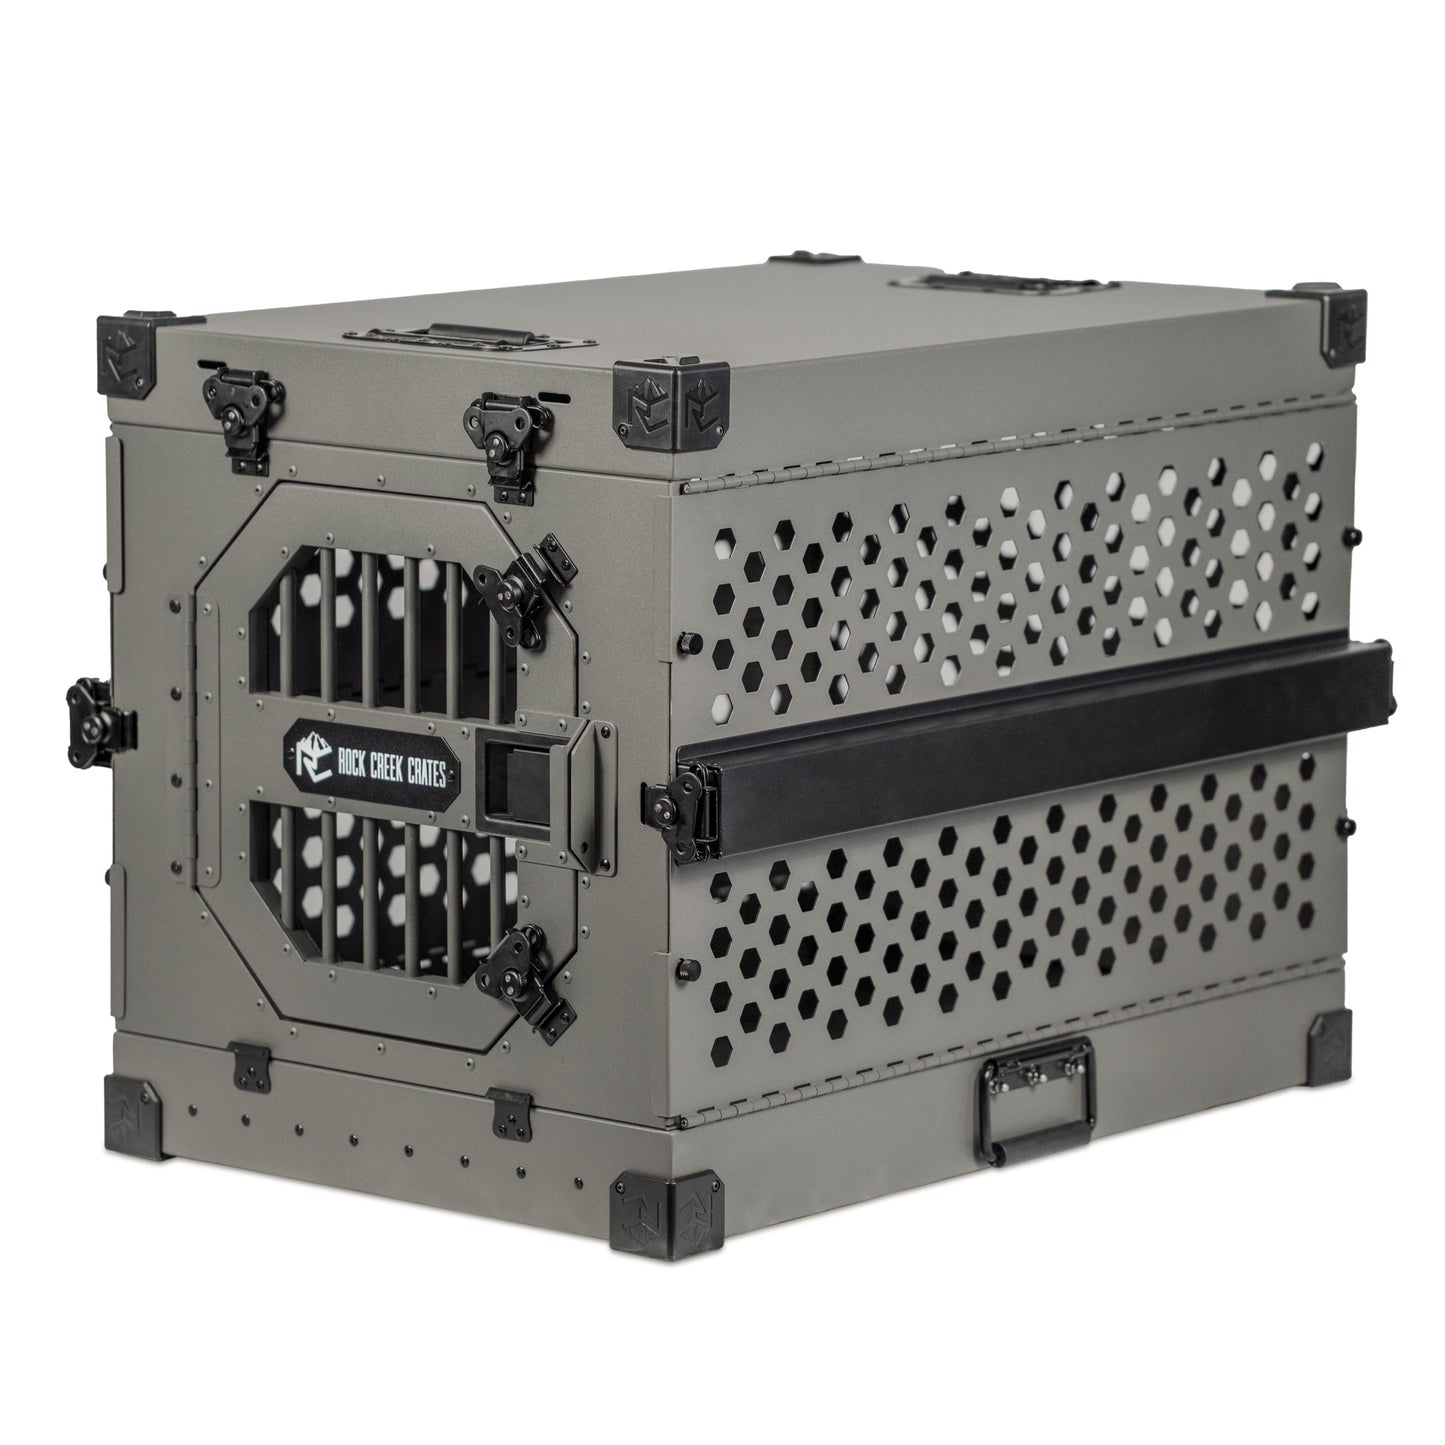 Collapsible Dog Crate